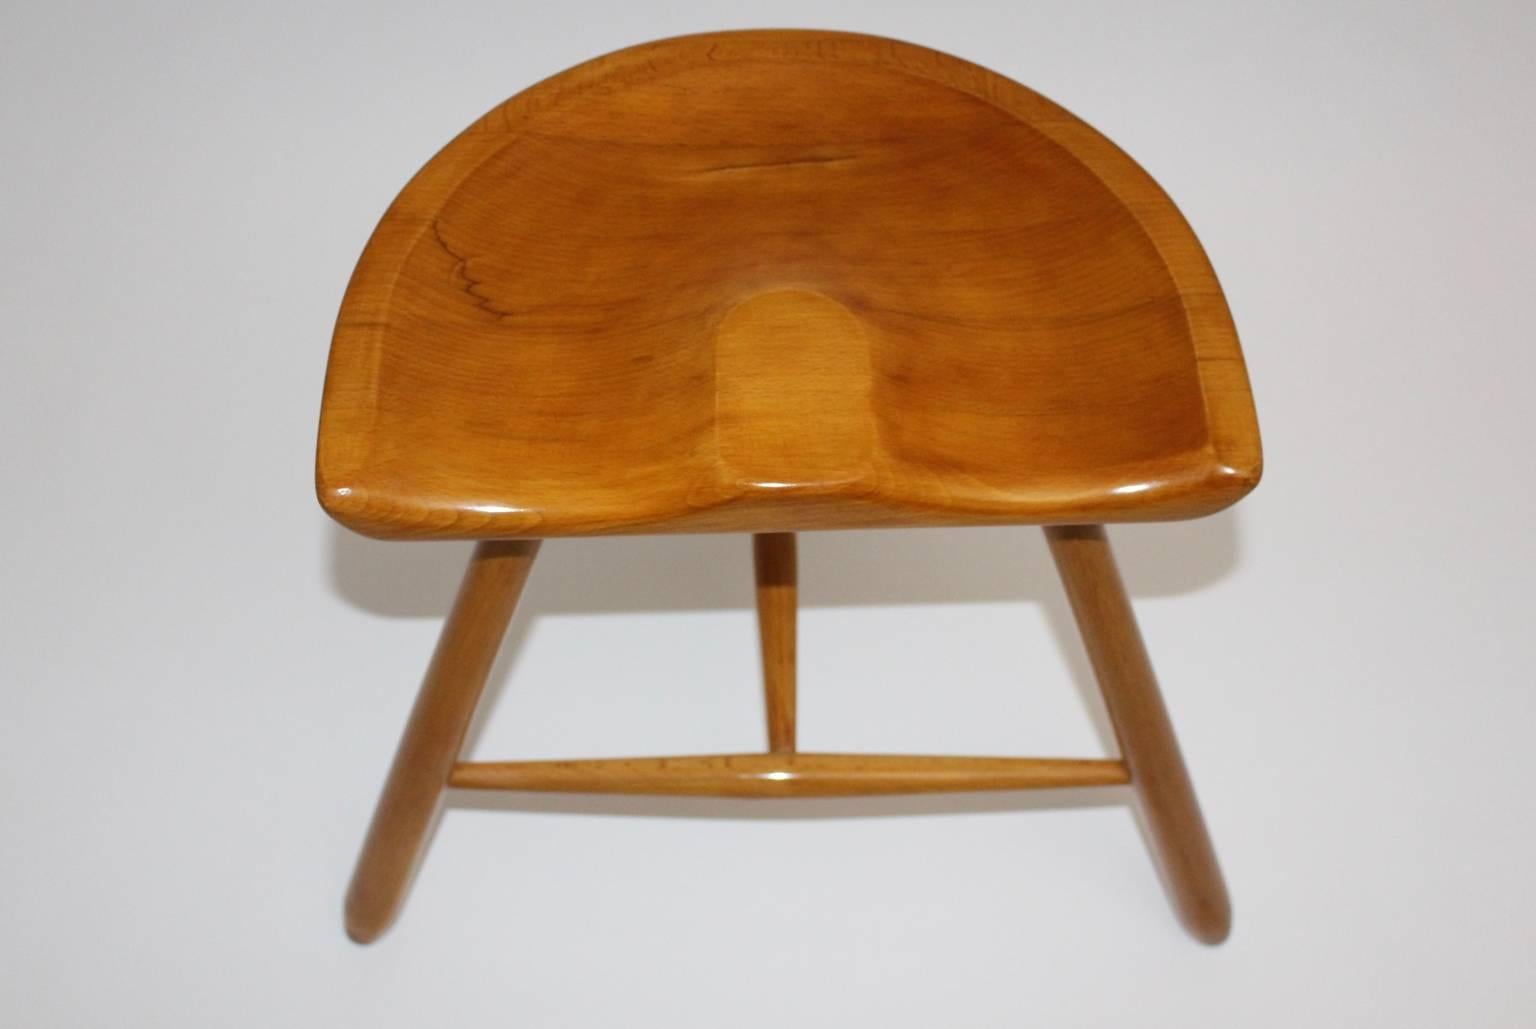 Art Deco Vintage Brown Maple Stool with Three Legs circa 1933 Vienna For Sale 5